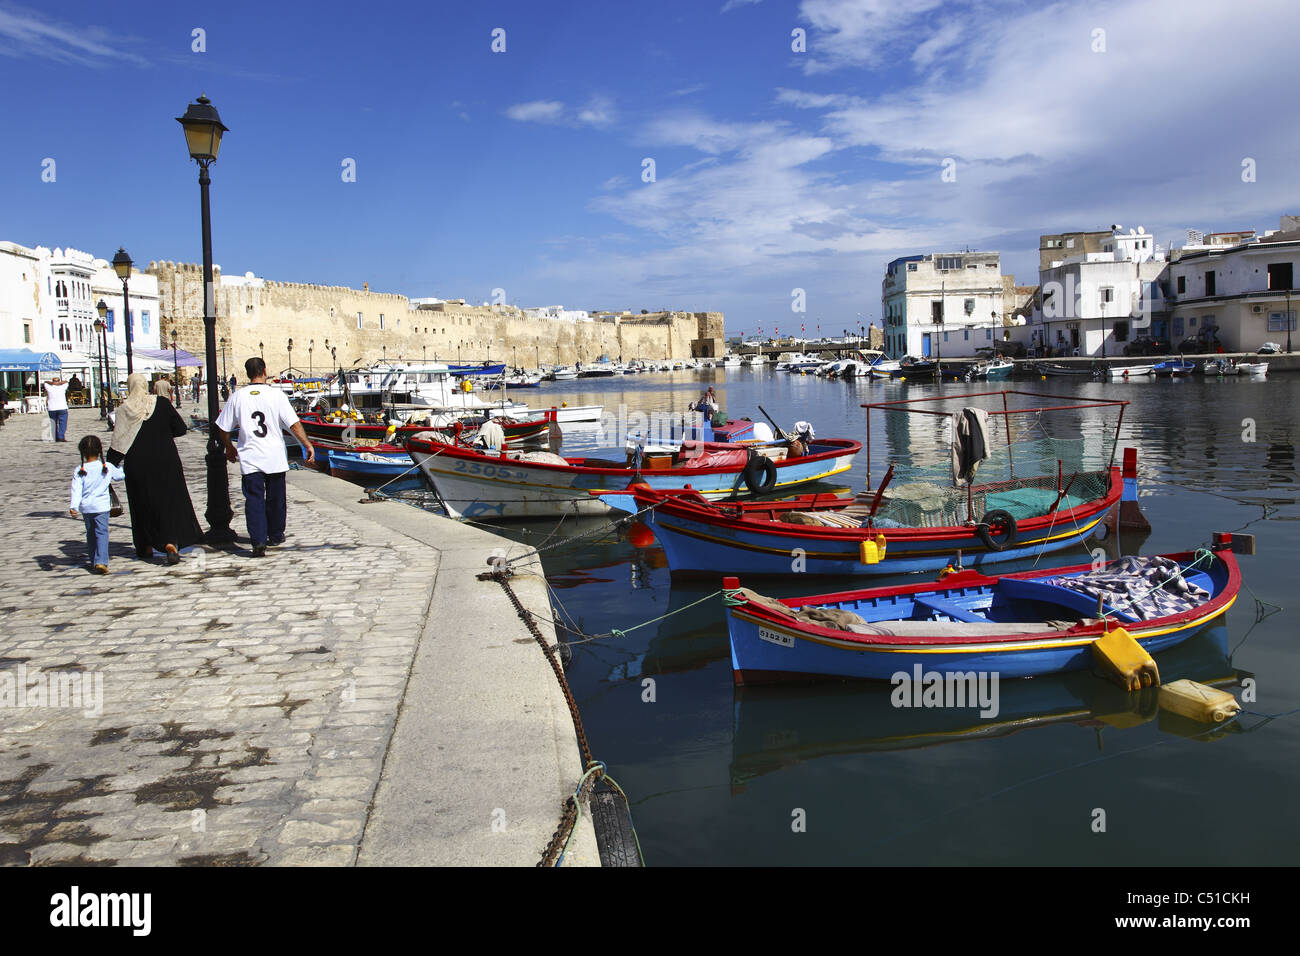 Africa, Tunisia, Bizerte, Old Port Canal, Fishing Boats in the Harbor, Kasbah Wall Stock Photo